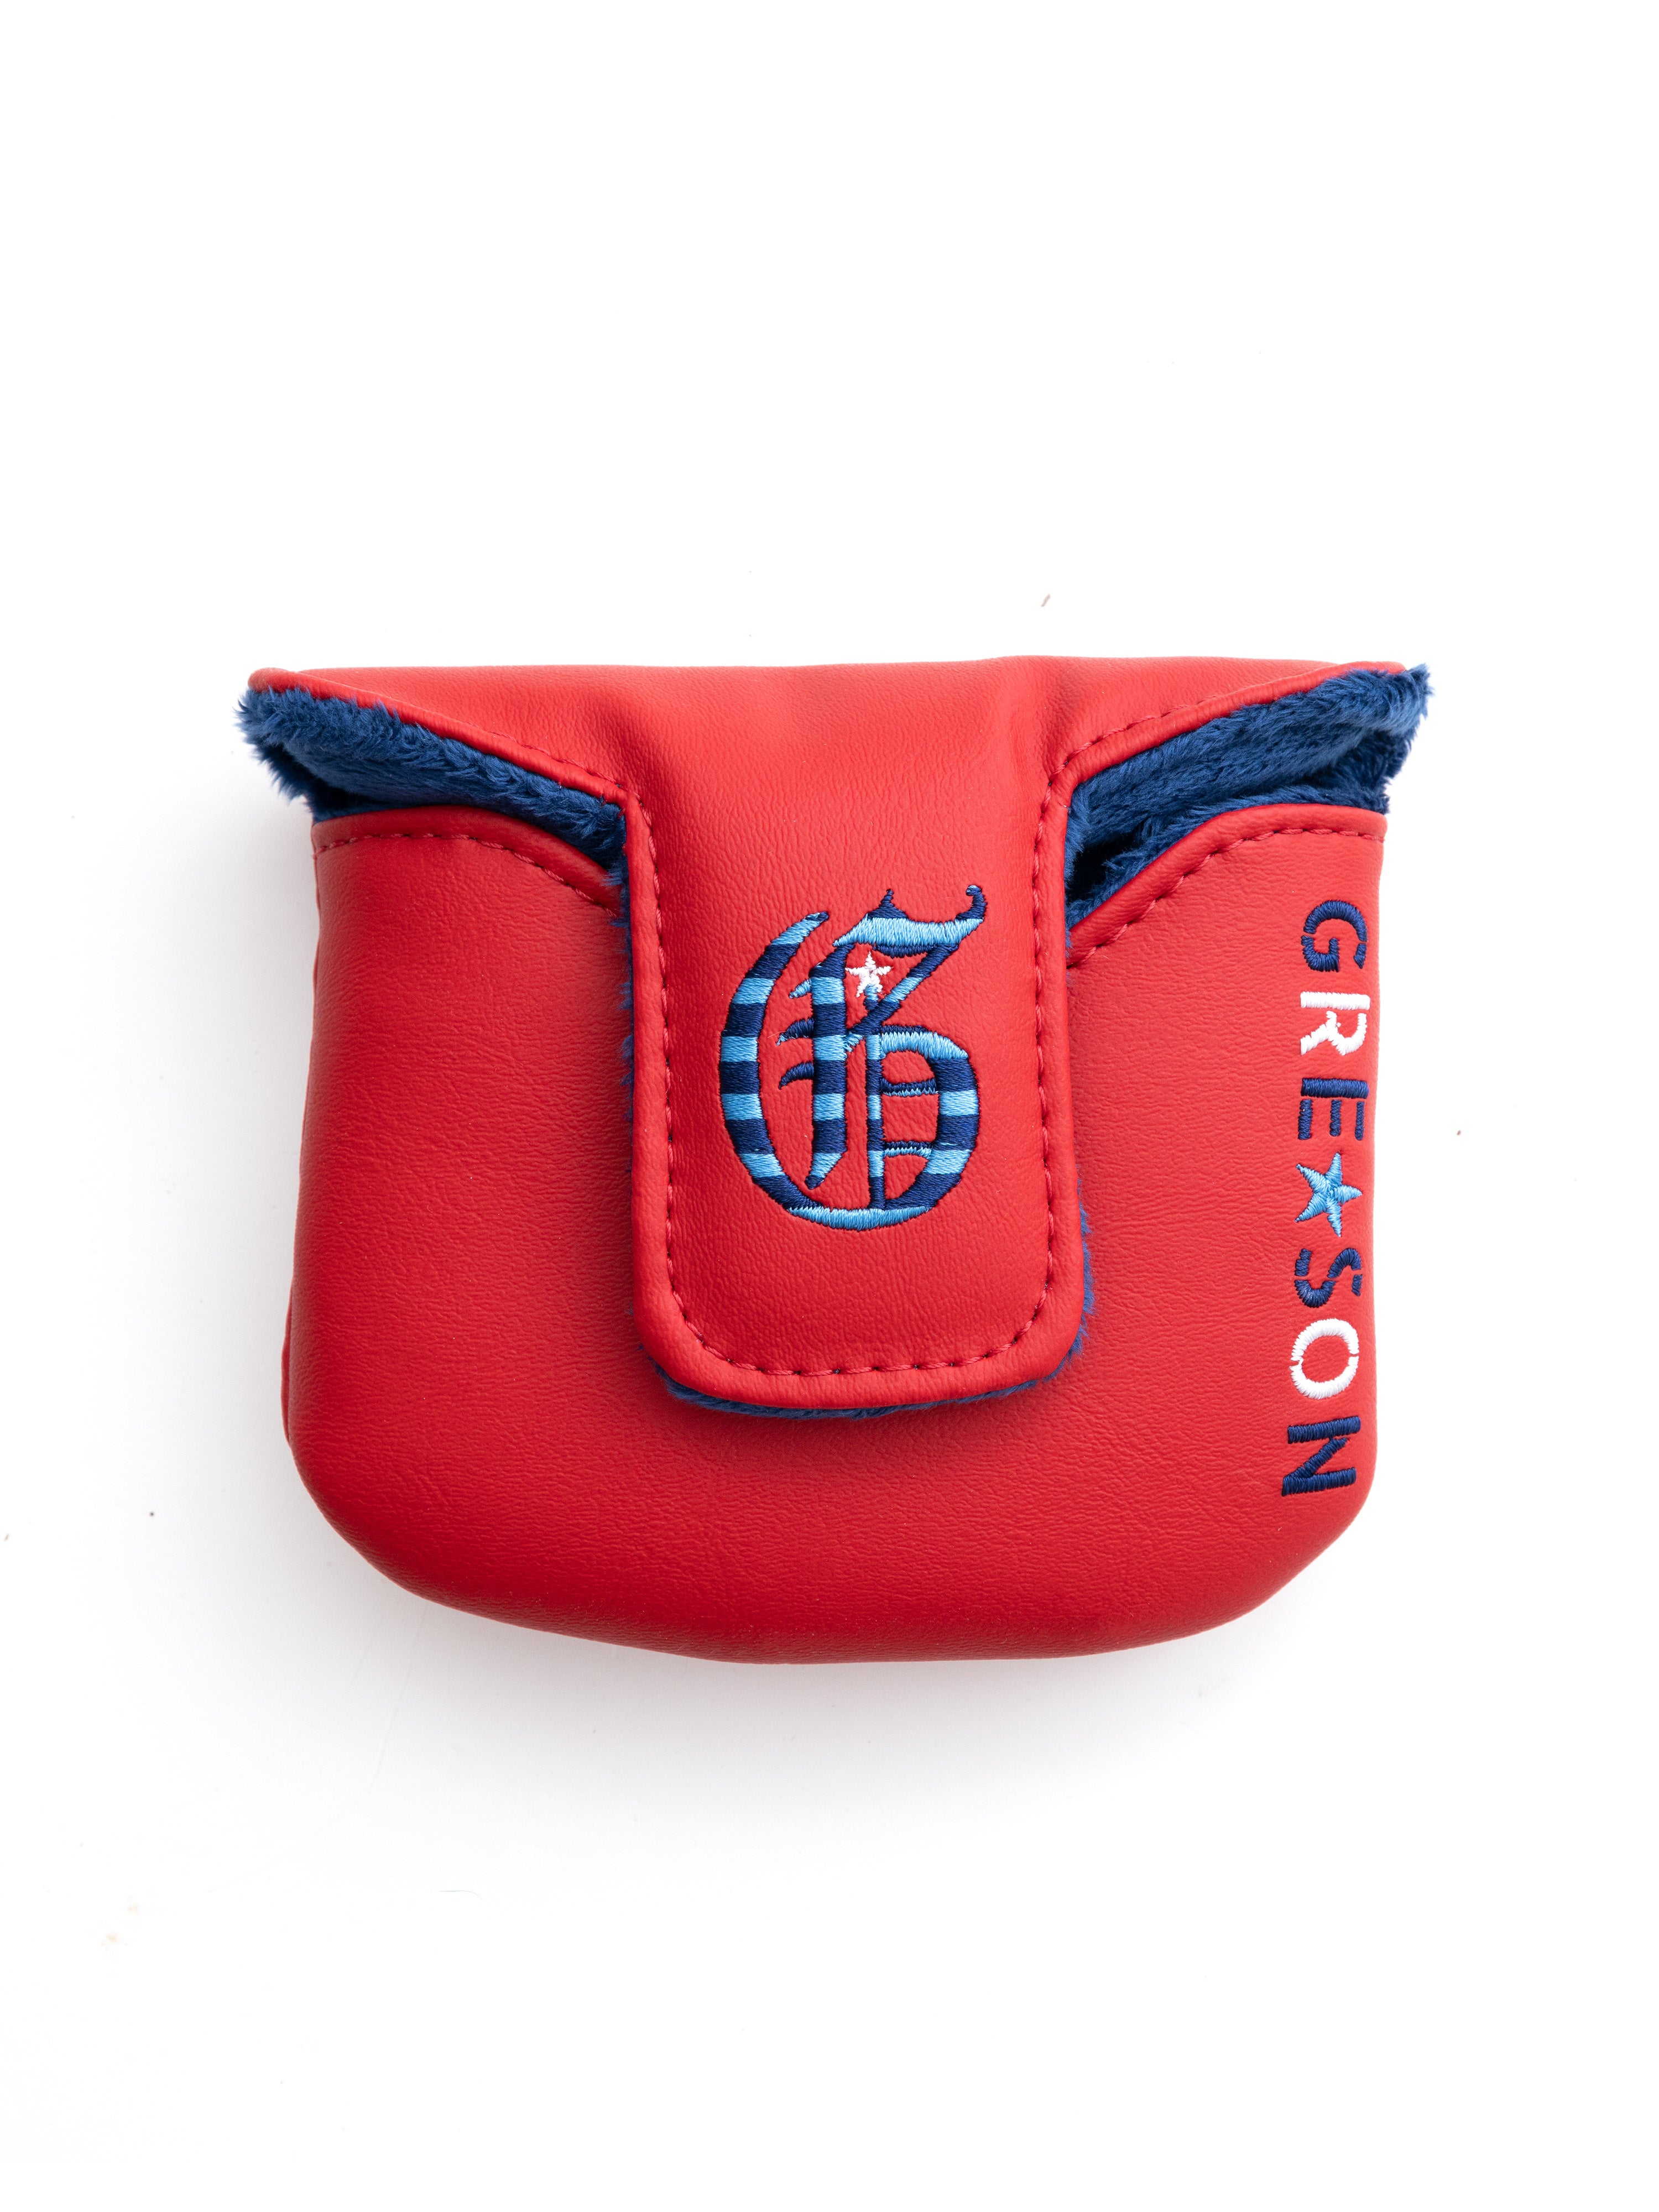 US Open Mallet Putter Cover